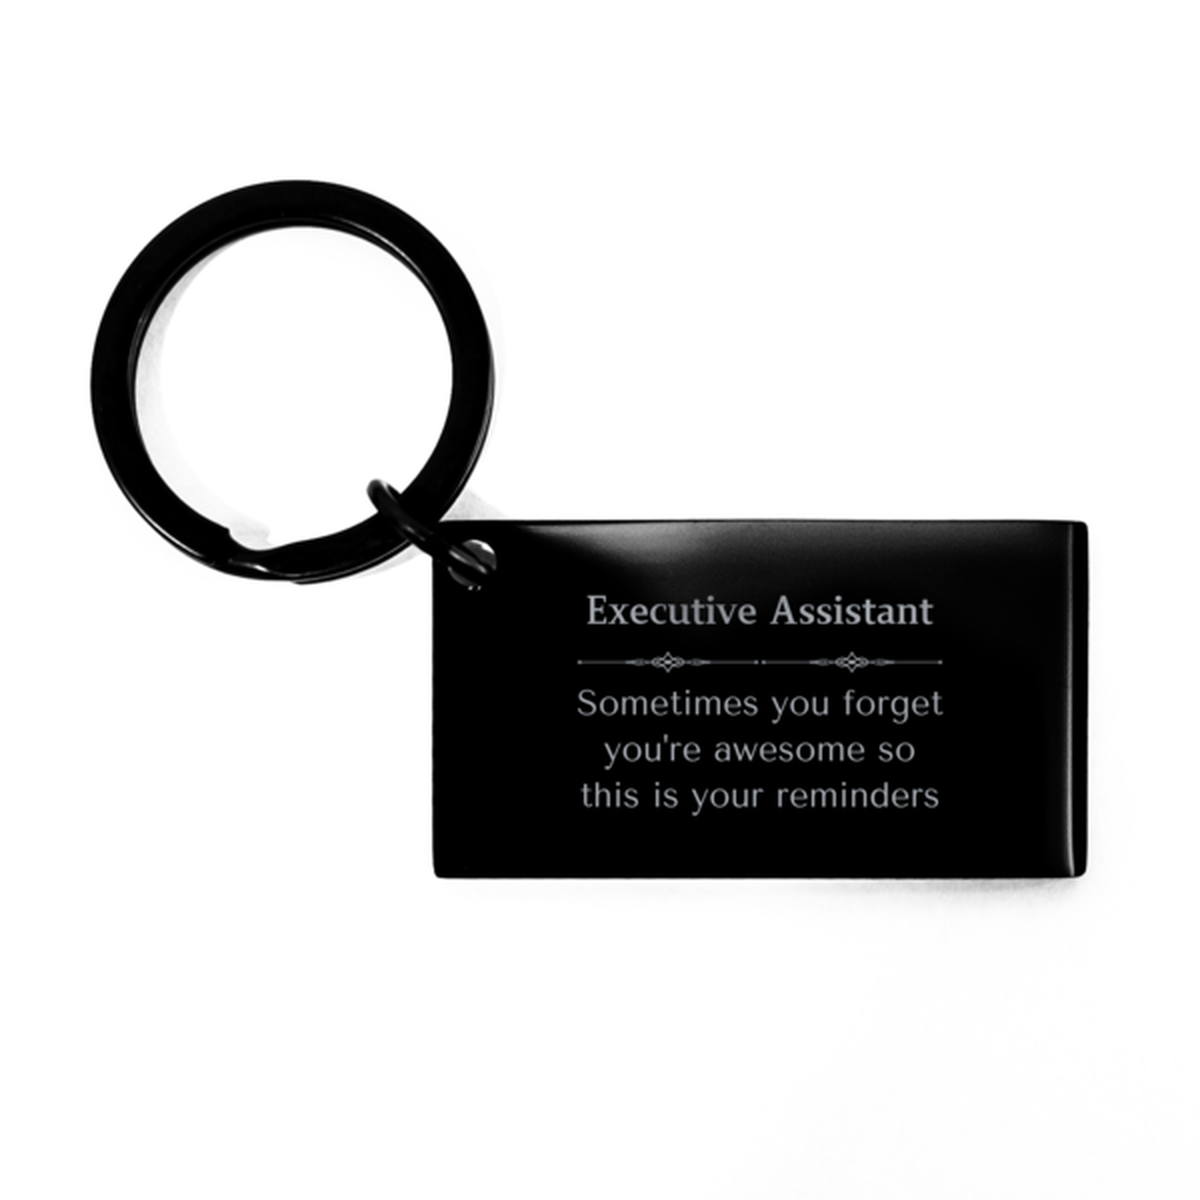 Sentimental Executive Assistant Keychain, Judge Sometimes you forget you're awesome so this is your reminders, Graduation Christmas Birthday Gifts for Executive Assistant, Men, Women, Coworkers